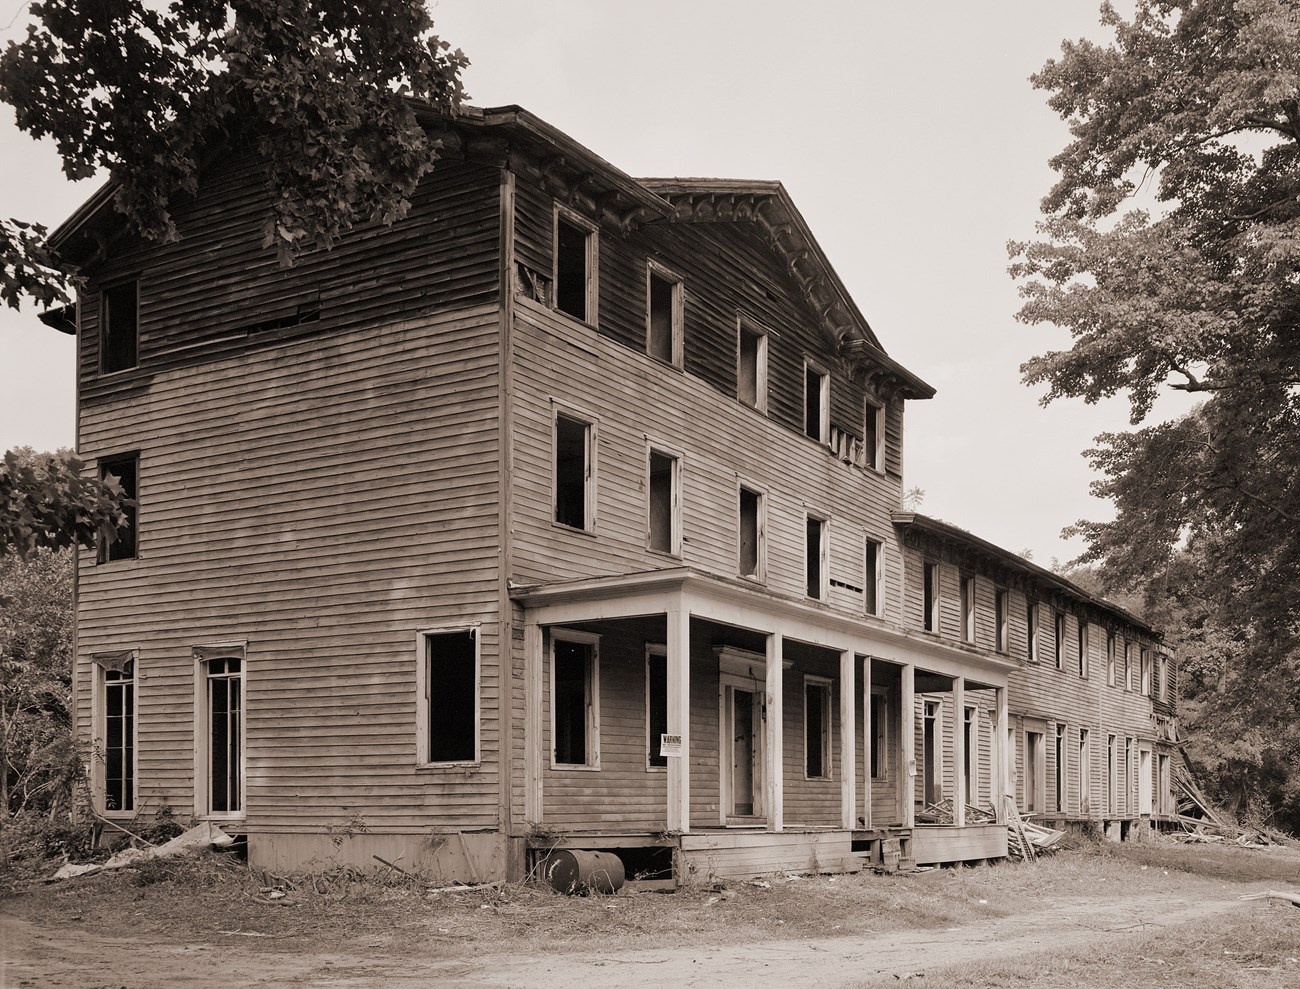 Three story building with wooden siding and all windows broken and without glass and a two story extension attatched to the right side